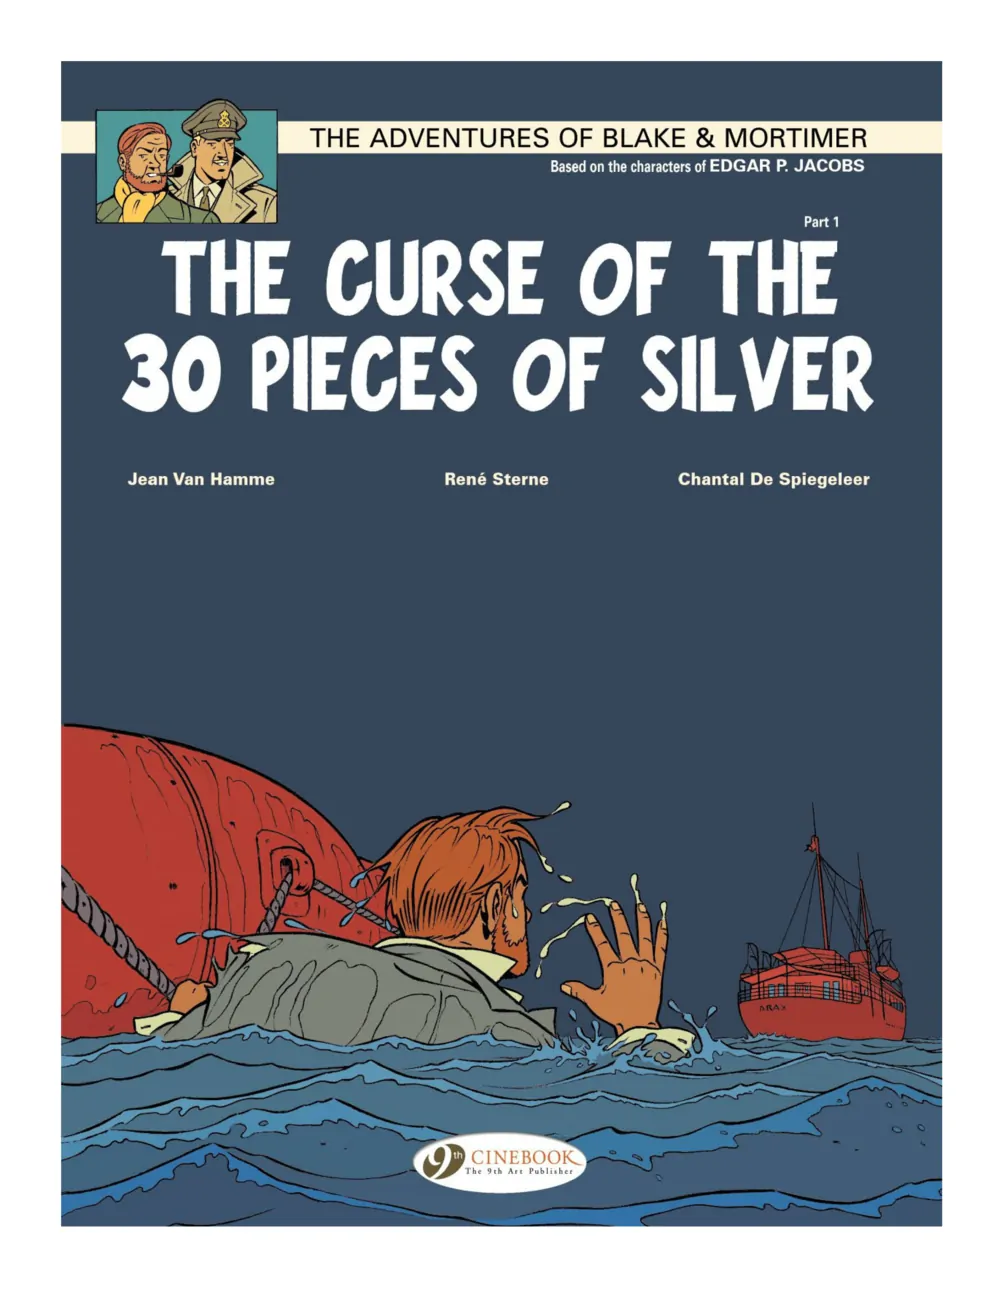 The Curse of the 30 Pieces of Silver - Part 1